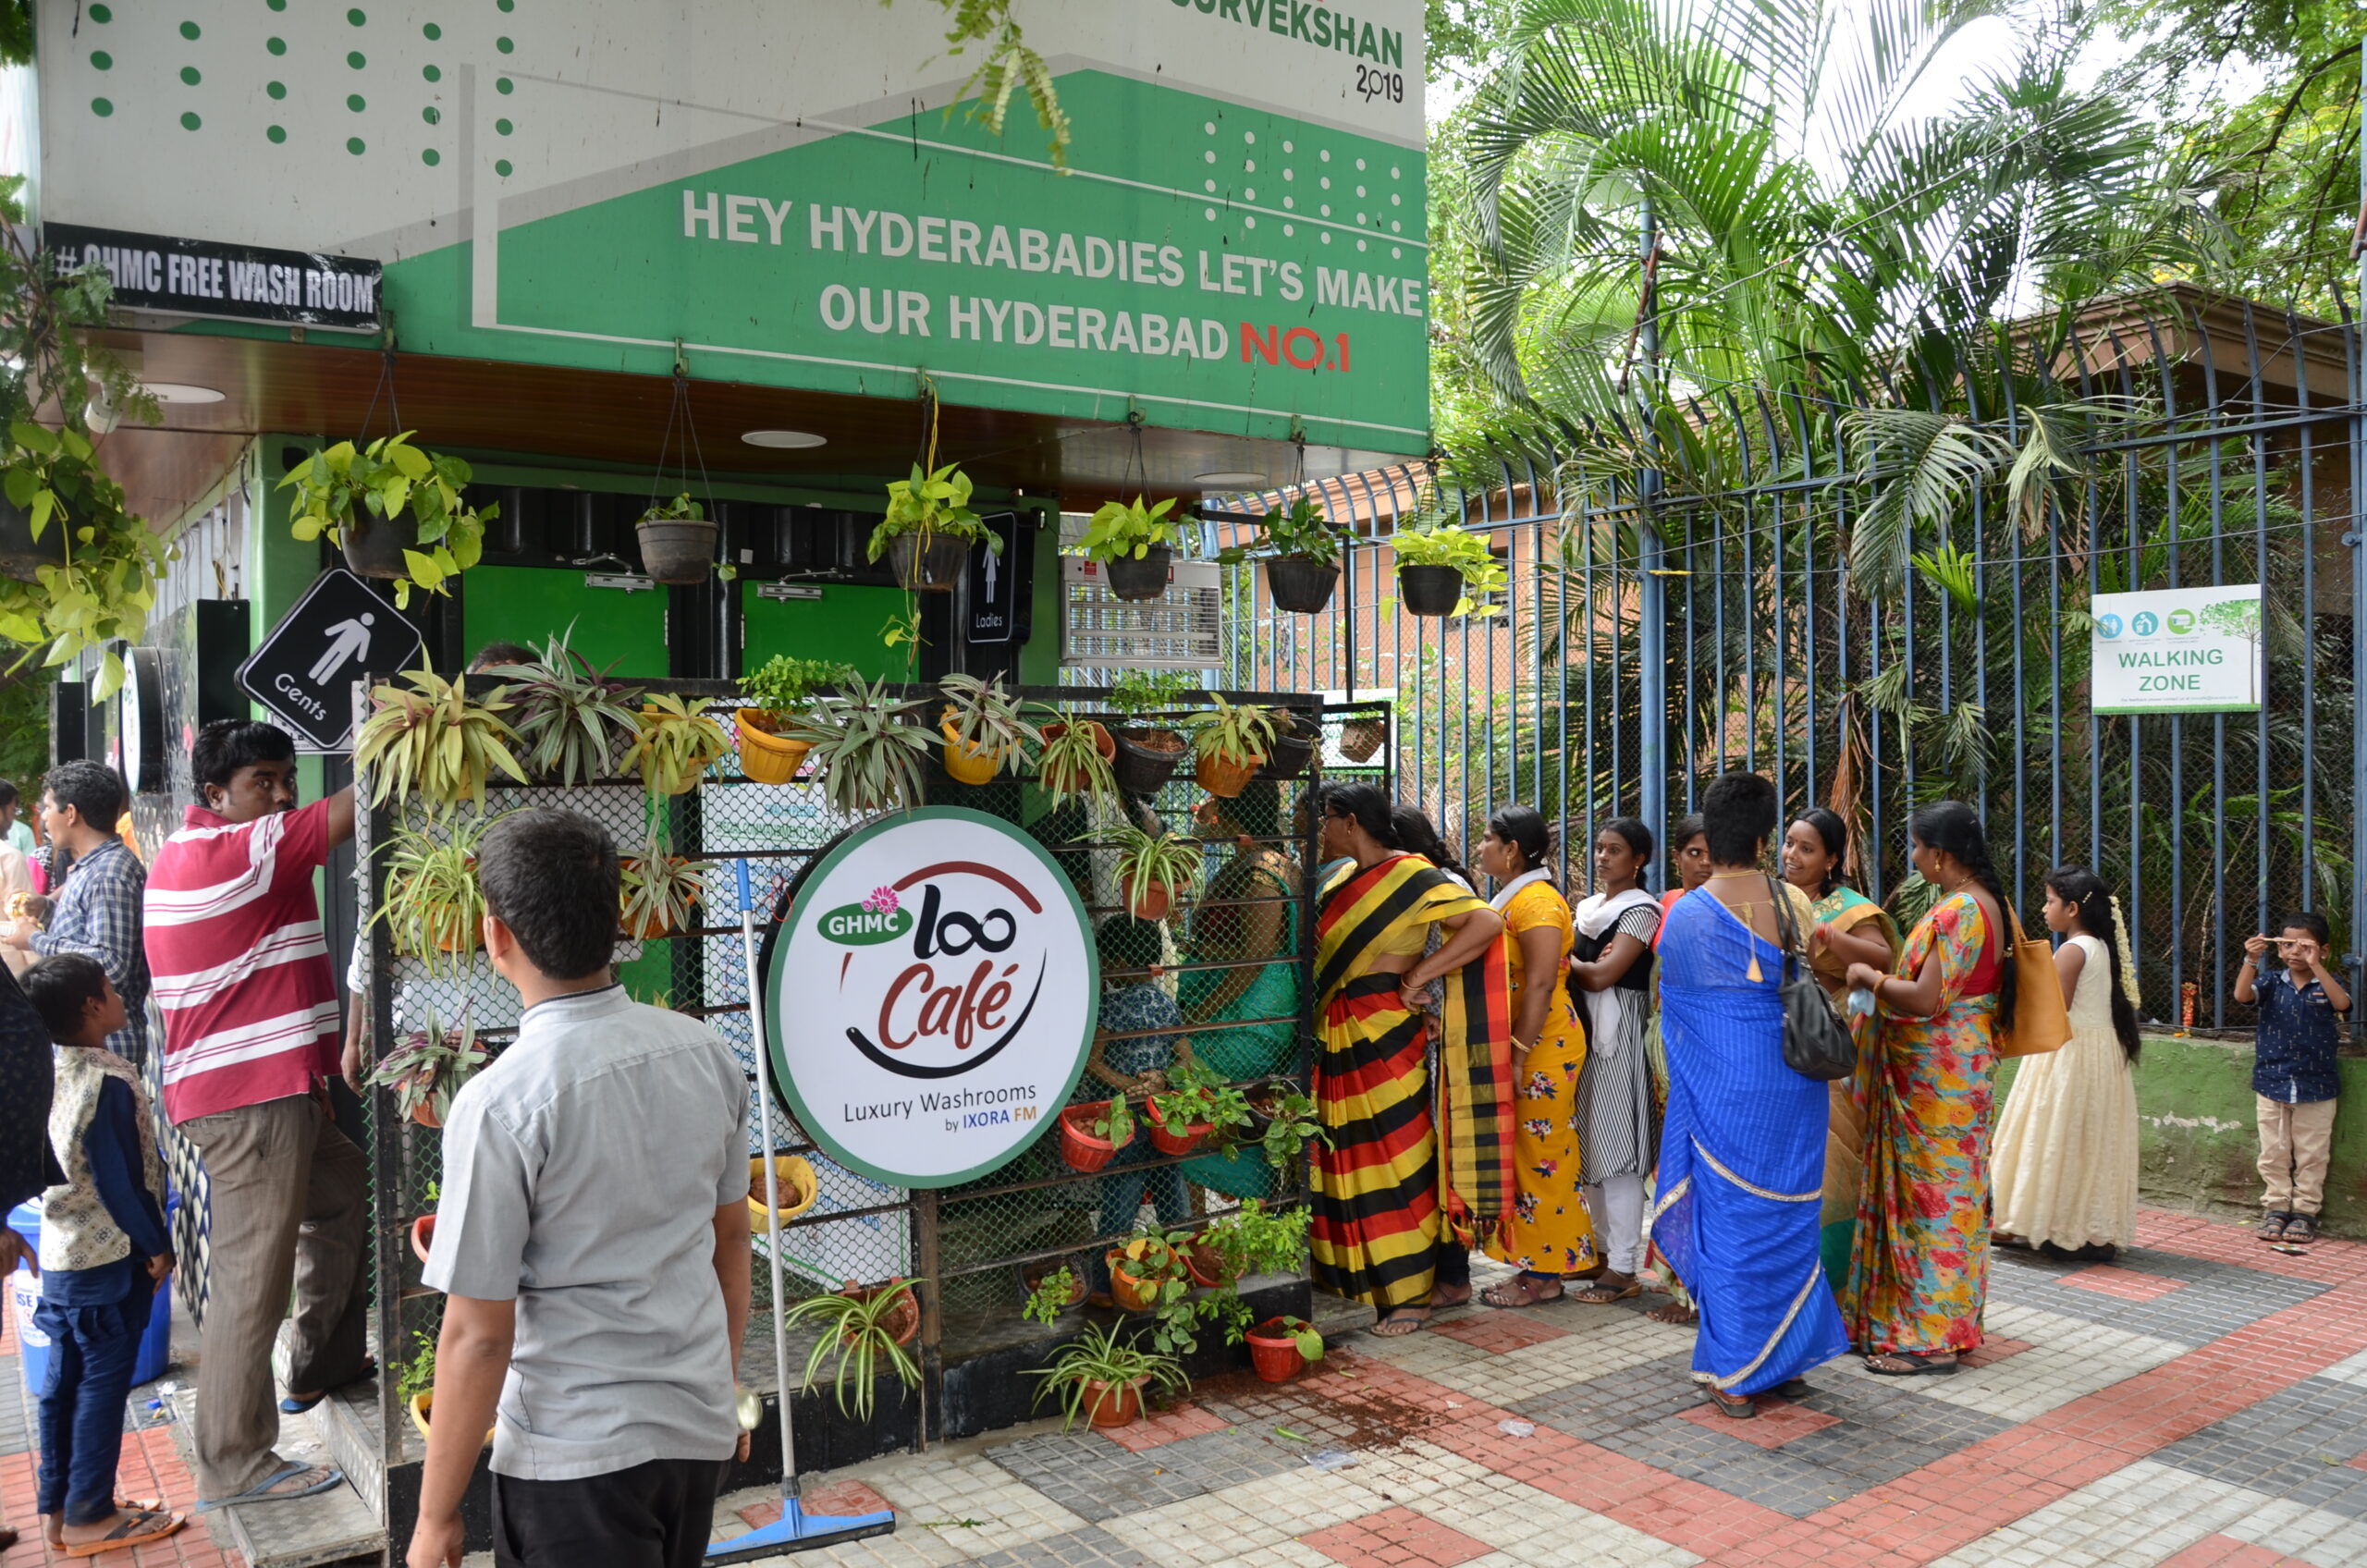 GHMC Loocafé breaks records with over 10k people using washrooms